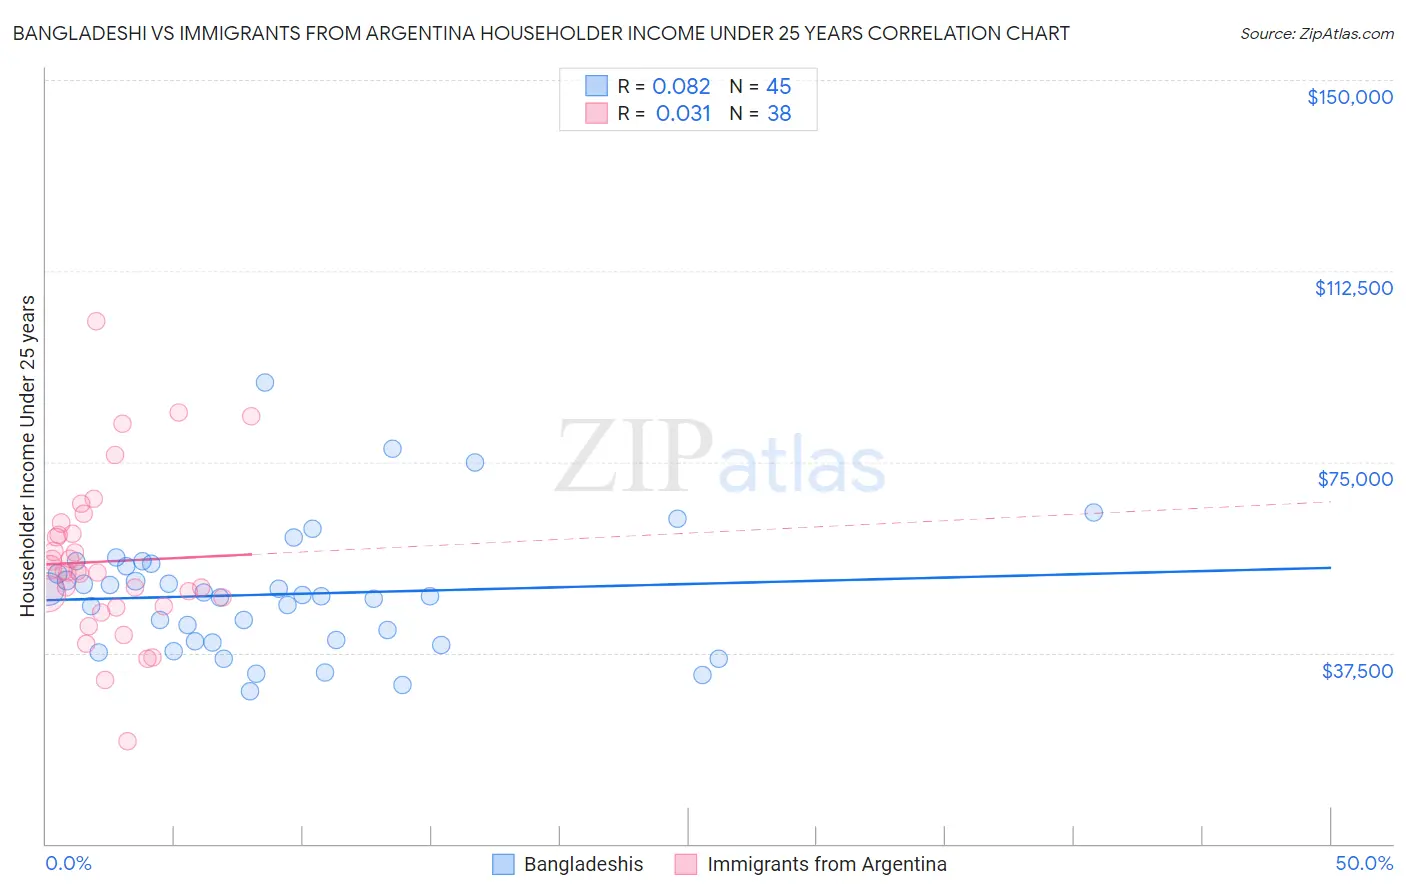 Bangladeshi vs Immigrants from Argentina Householder Income Under 25 years